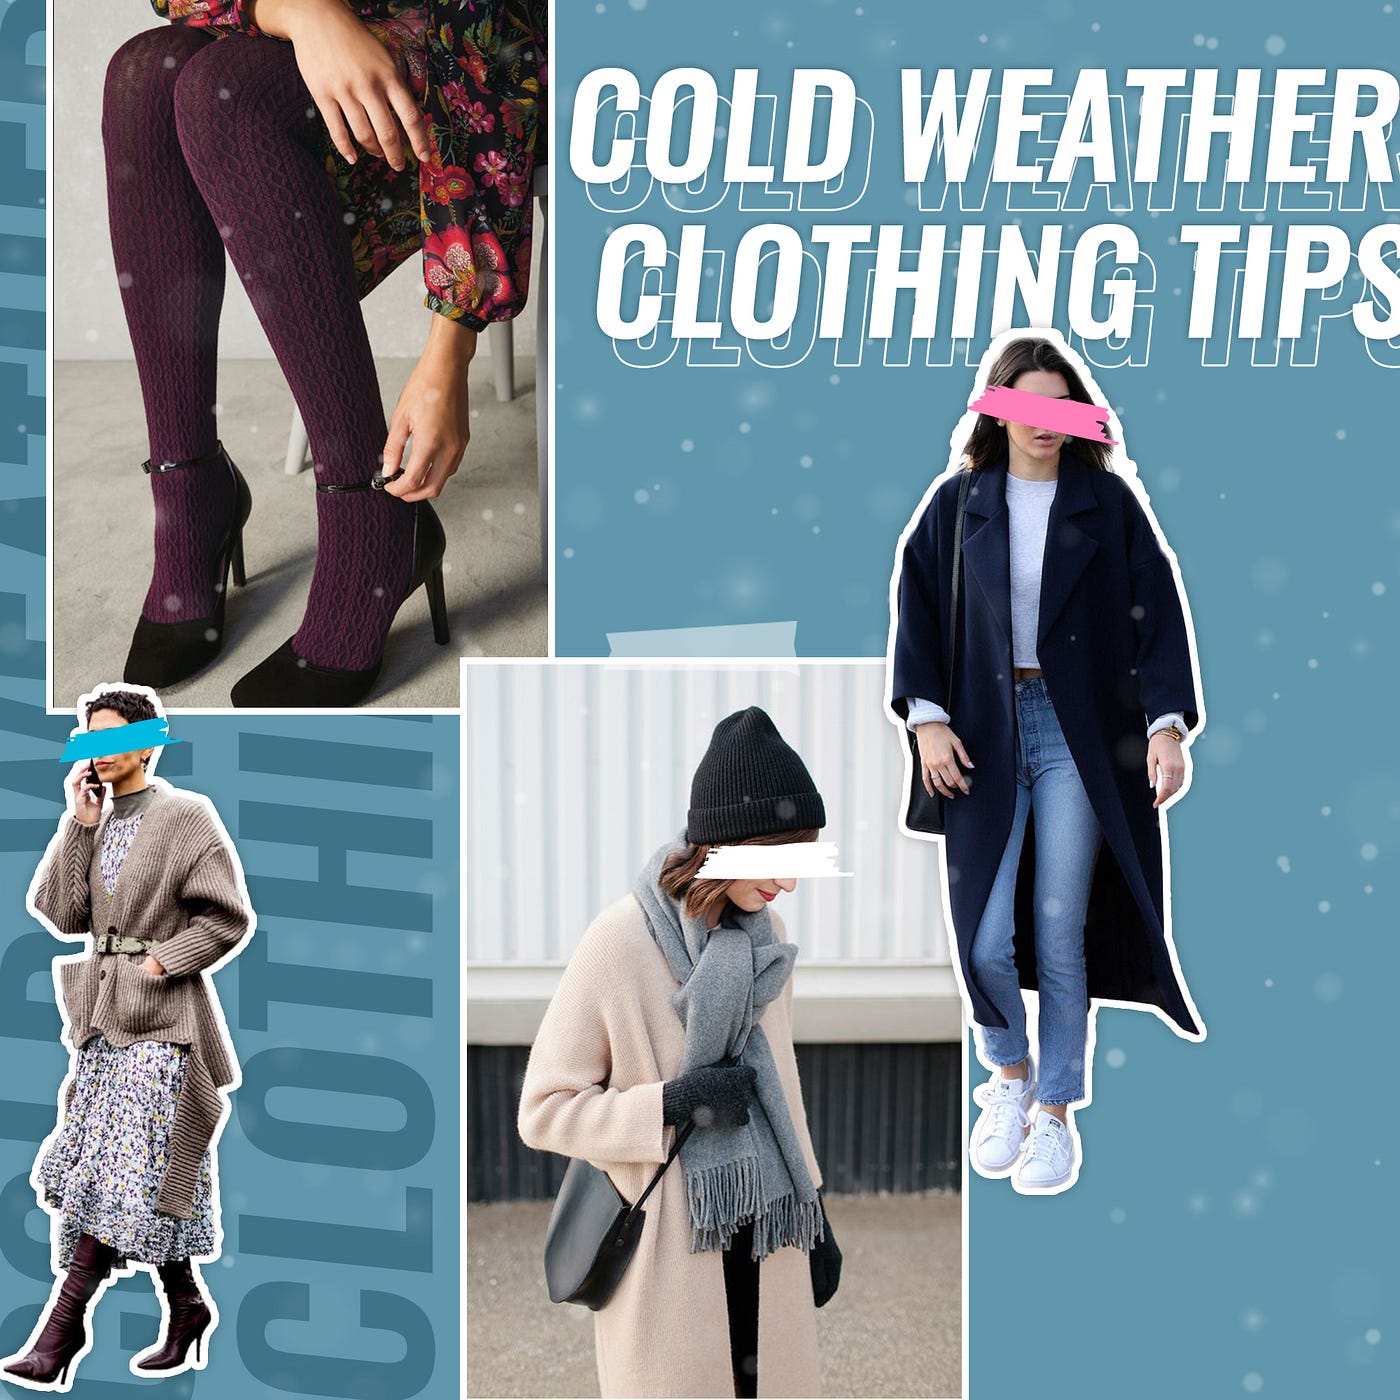 Cold weather clothing tips. Every year autumn brings a fashion…, by Zlaata